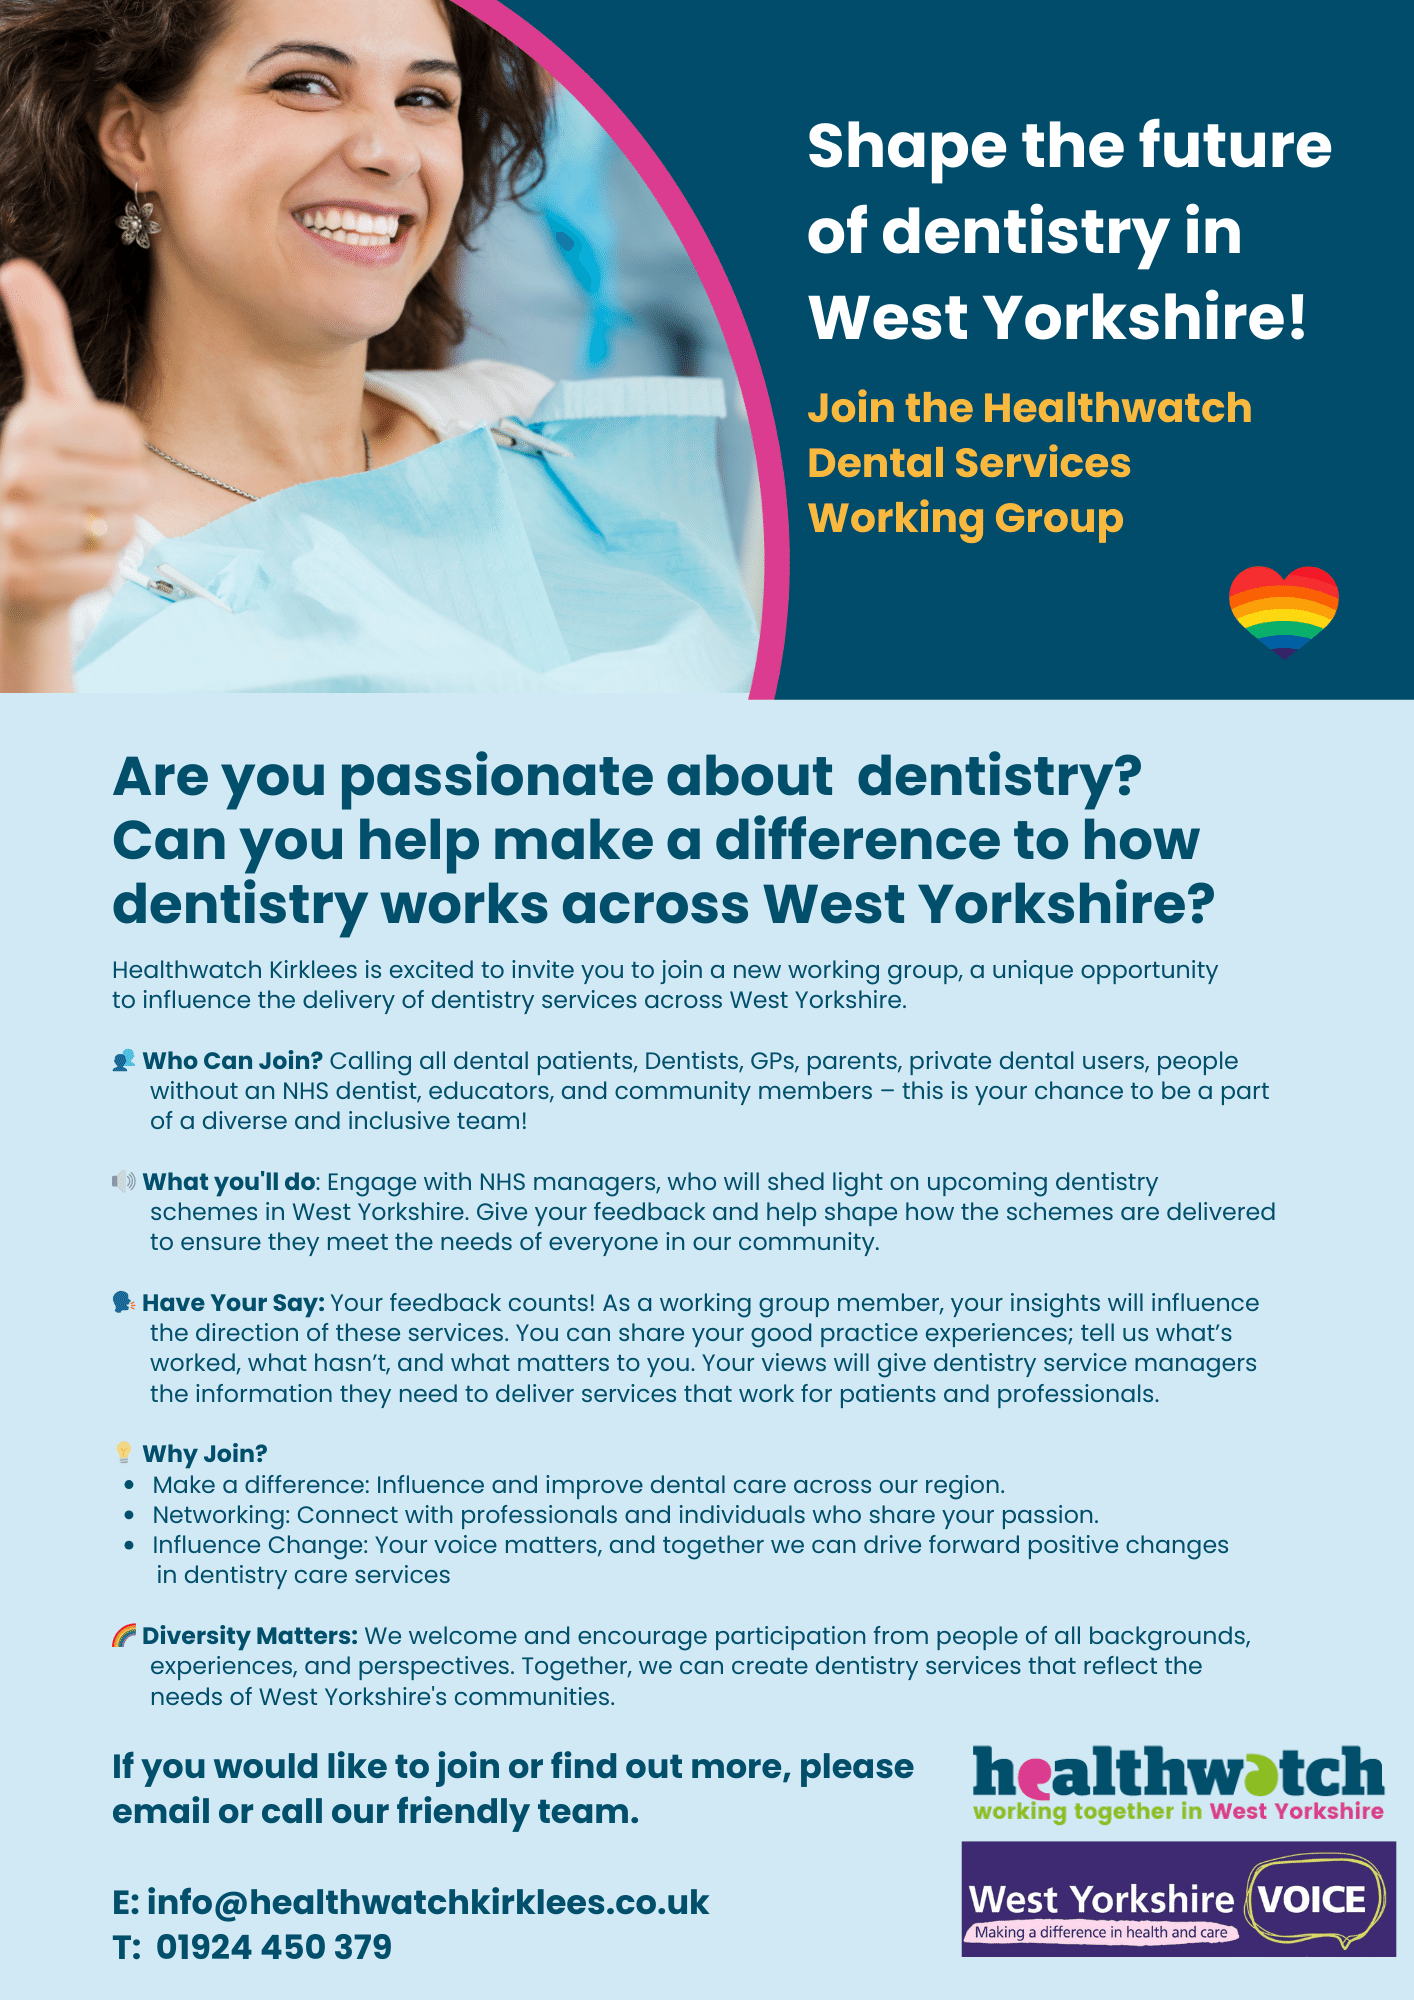 Healthwatch dentistry working group poster